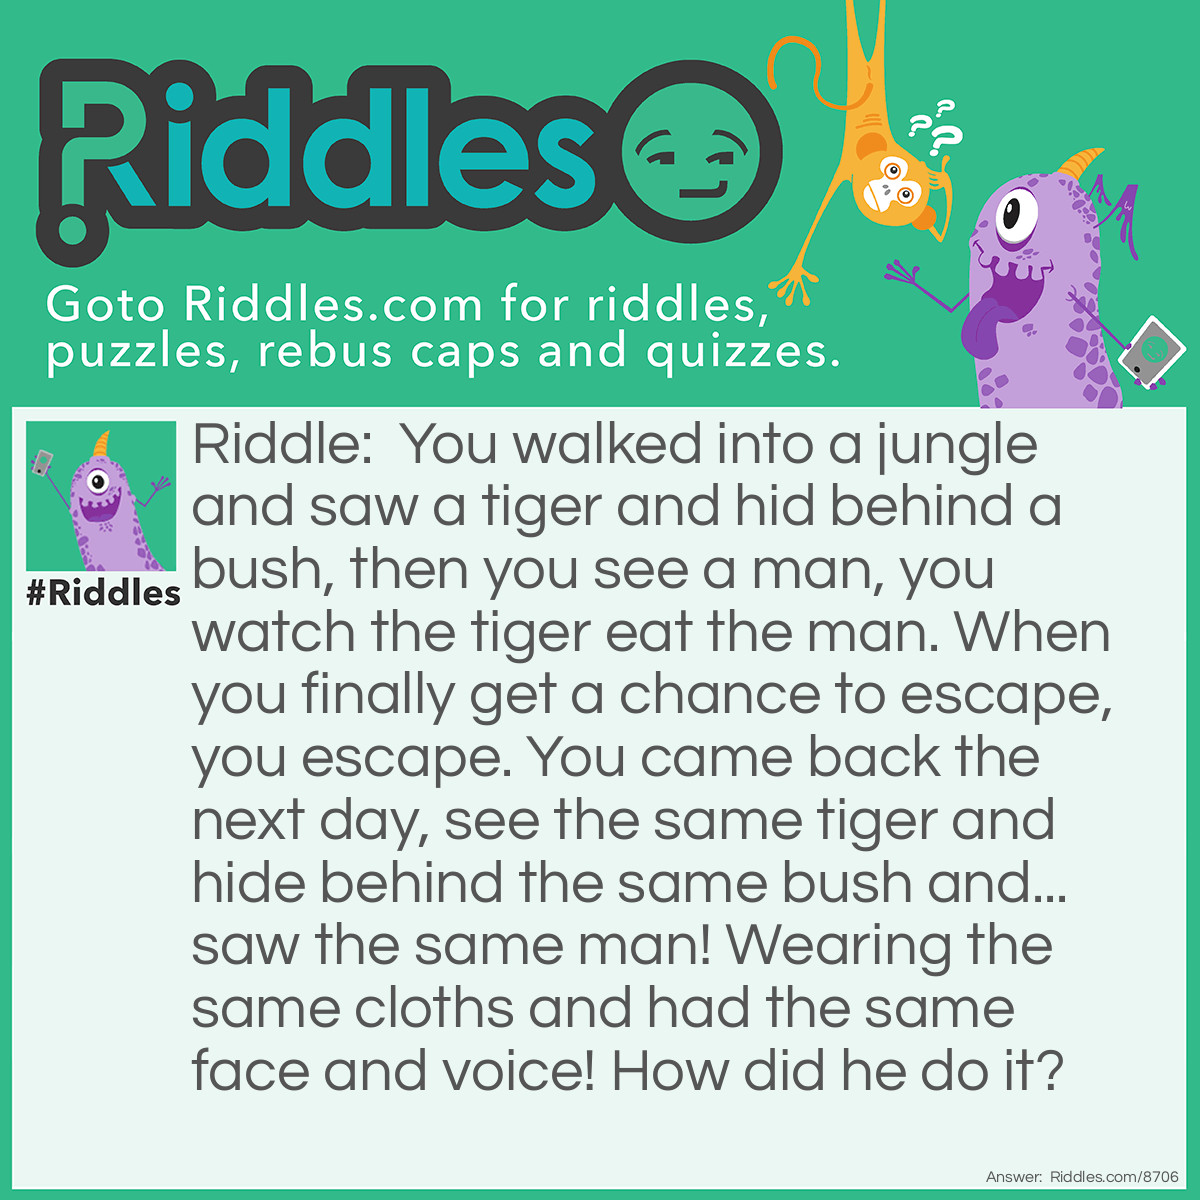 Riddle: You walked into a jungle and saw a tiger and hid behind a bush, then you see a man, you watch the tiger eat the man. When you finally get a chance to escape, you escape. You came back the next day, see the same tiger and hide behind the same bush and... saw the same man! Wearing the same cloths and had the same face and voice! How did he do it? Answer: He didn’t do it, it was his twin brother.